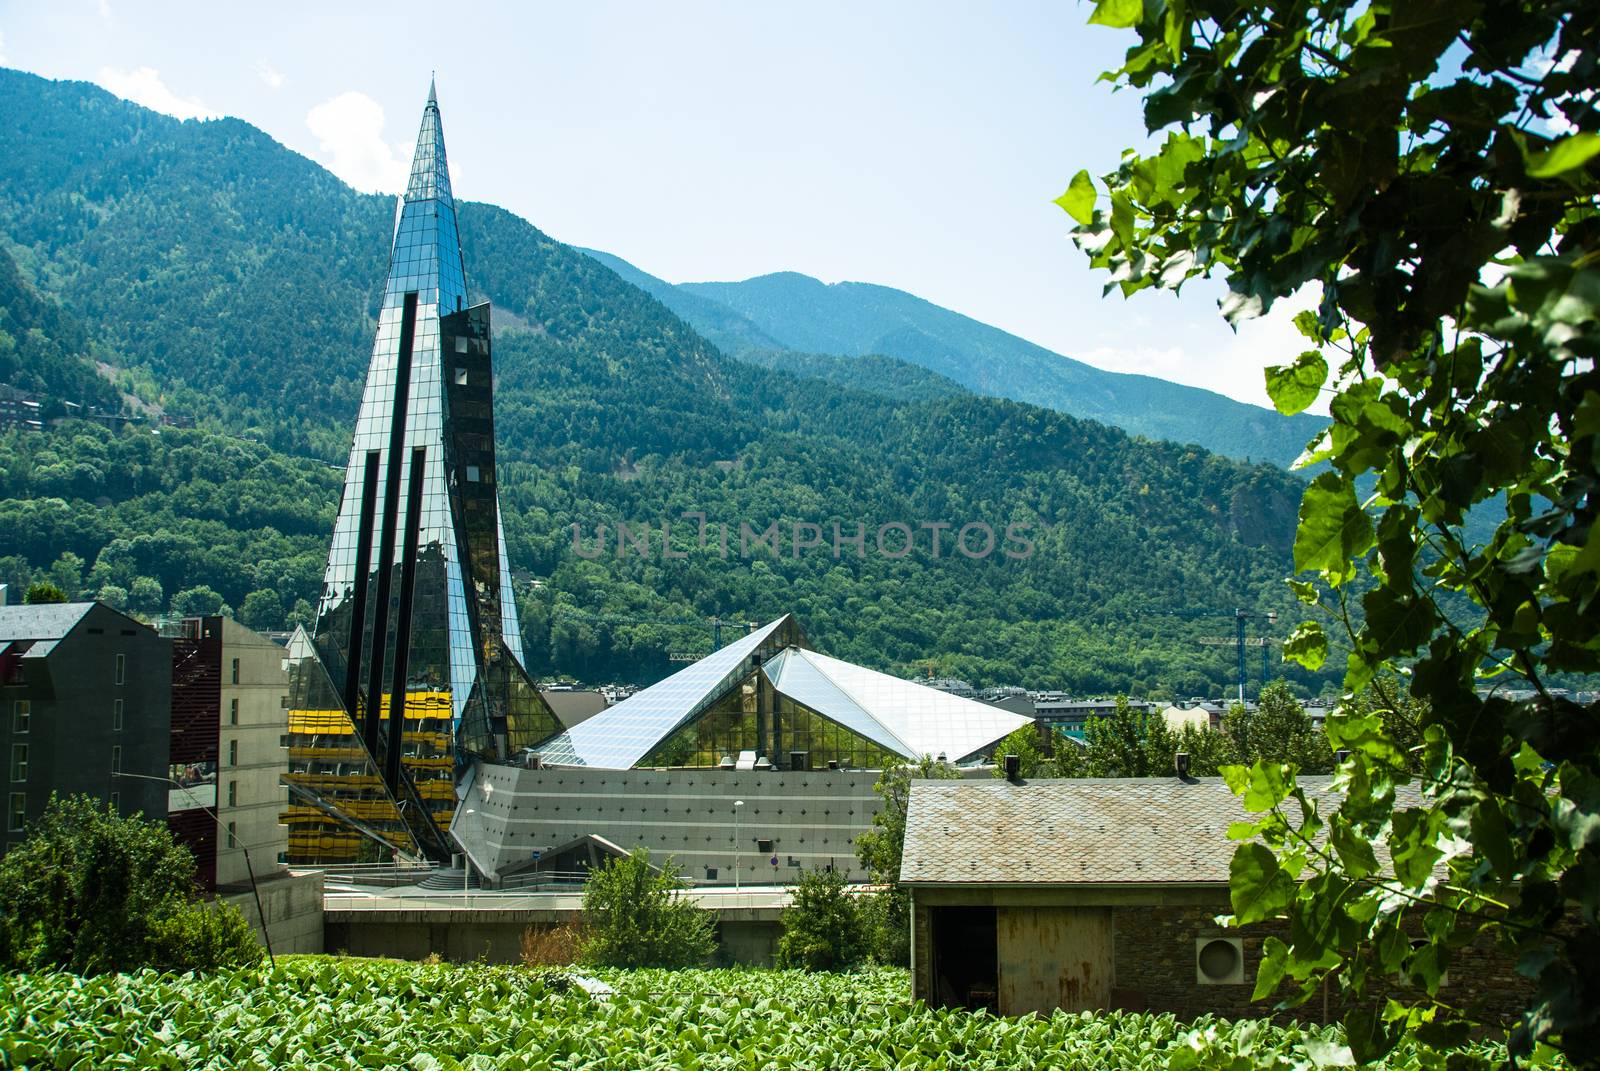 Caldea Spa glass building in Andorra with mountains at the background and tobacco fields at the foreground